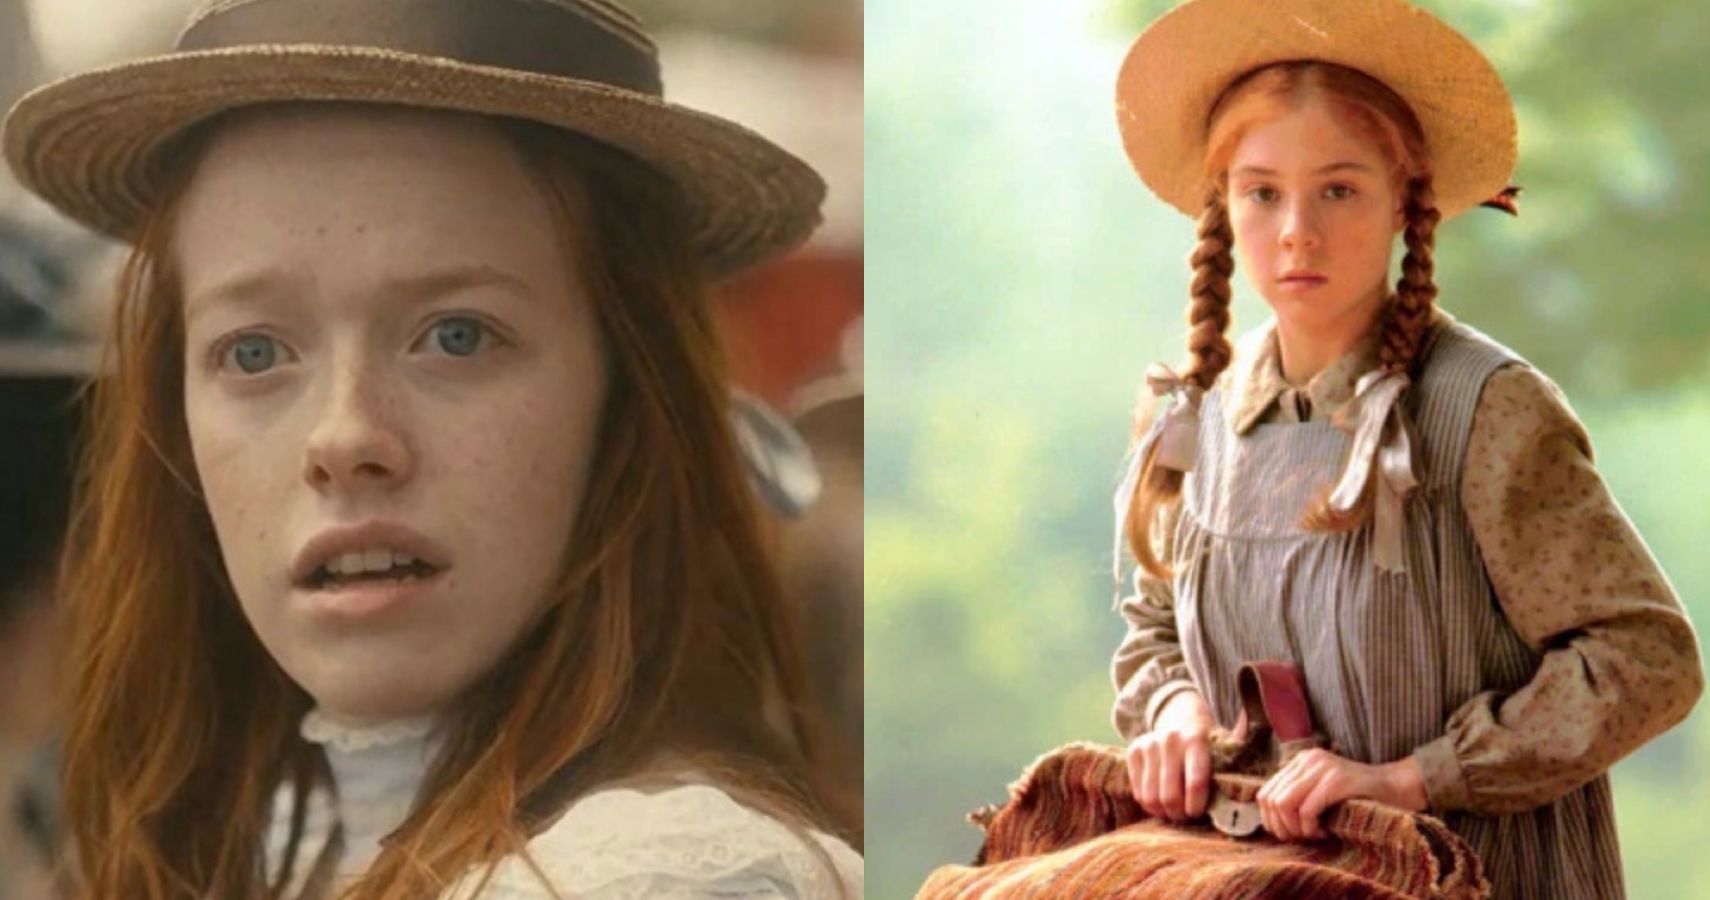 https://static1.srcdn.com/wordpress/wp-content/uploads/2020/02/Anne-With-An-E-And-Anne-Of-Green-Gables.jpg